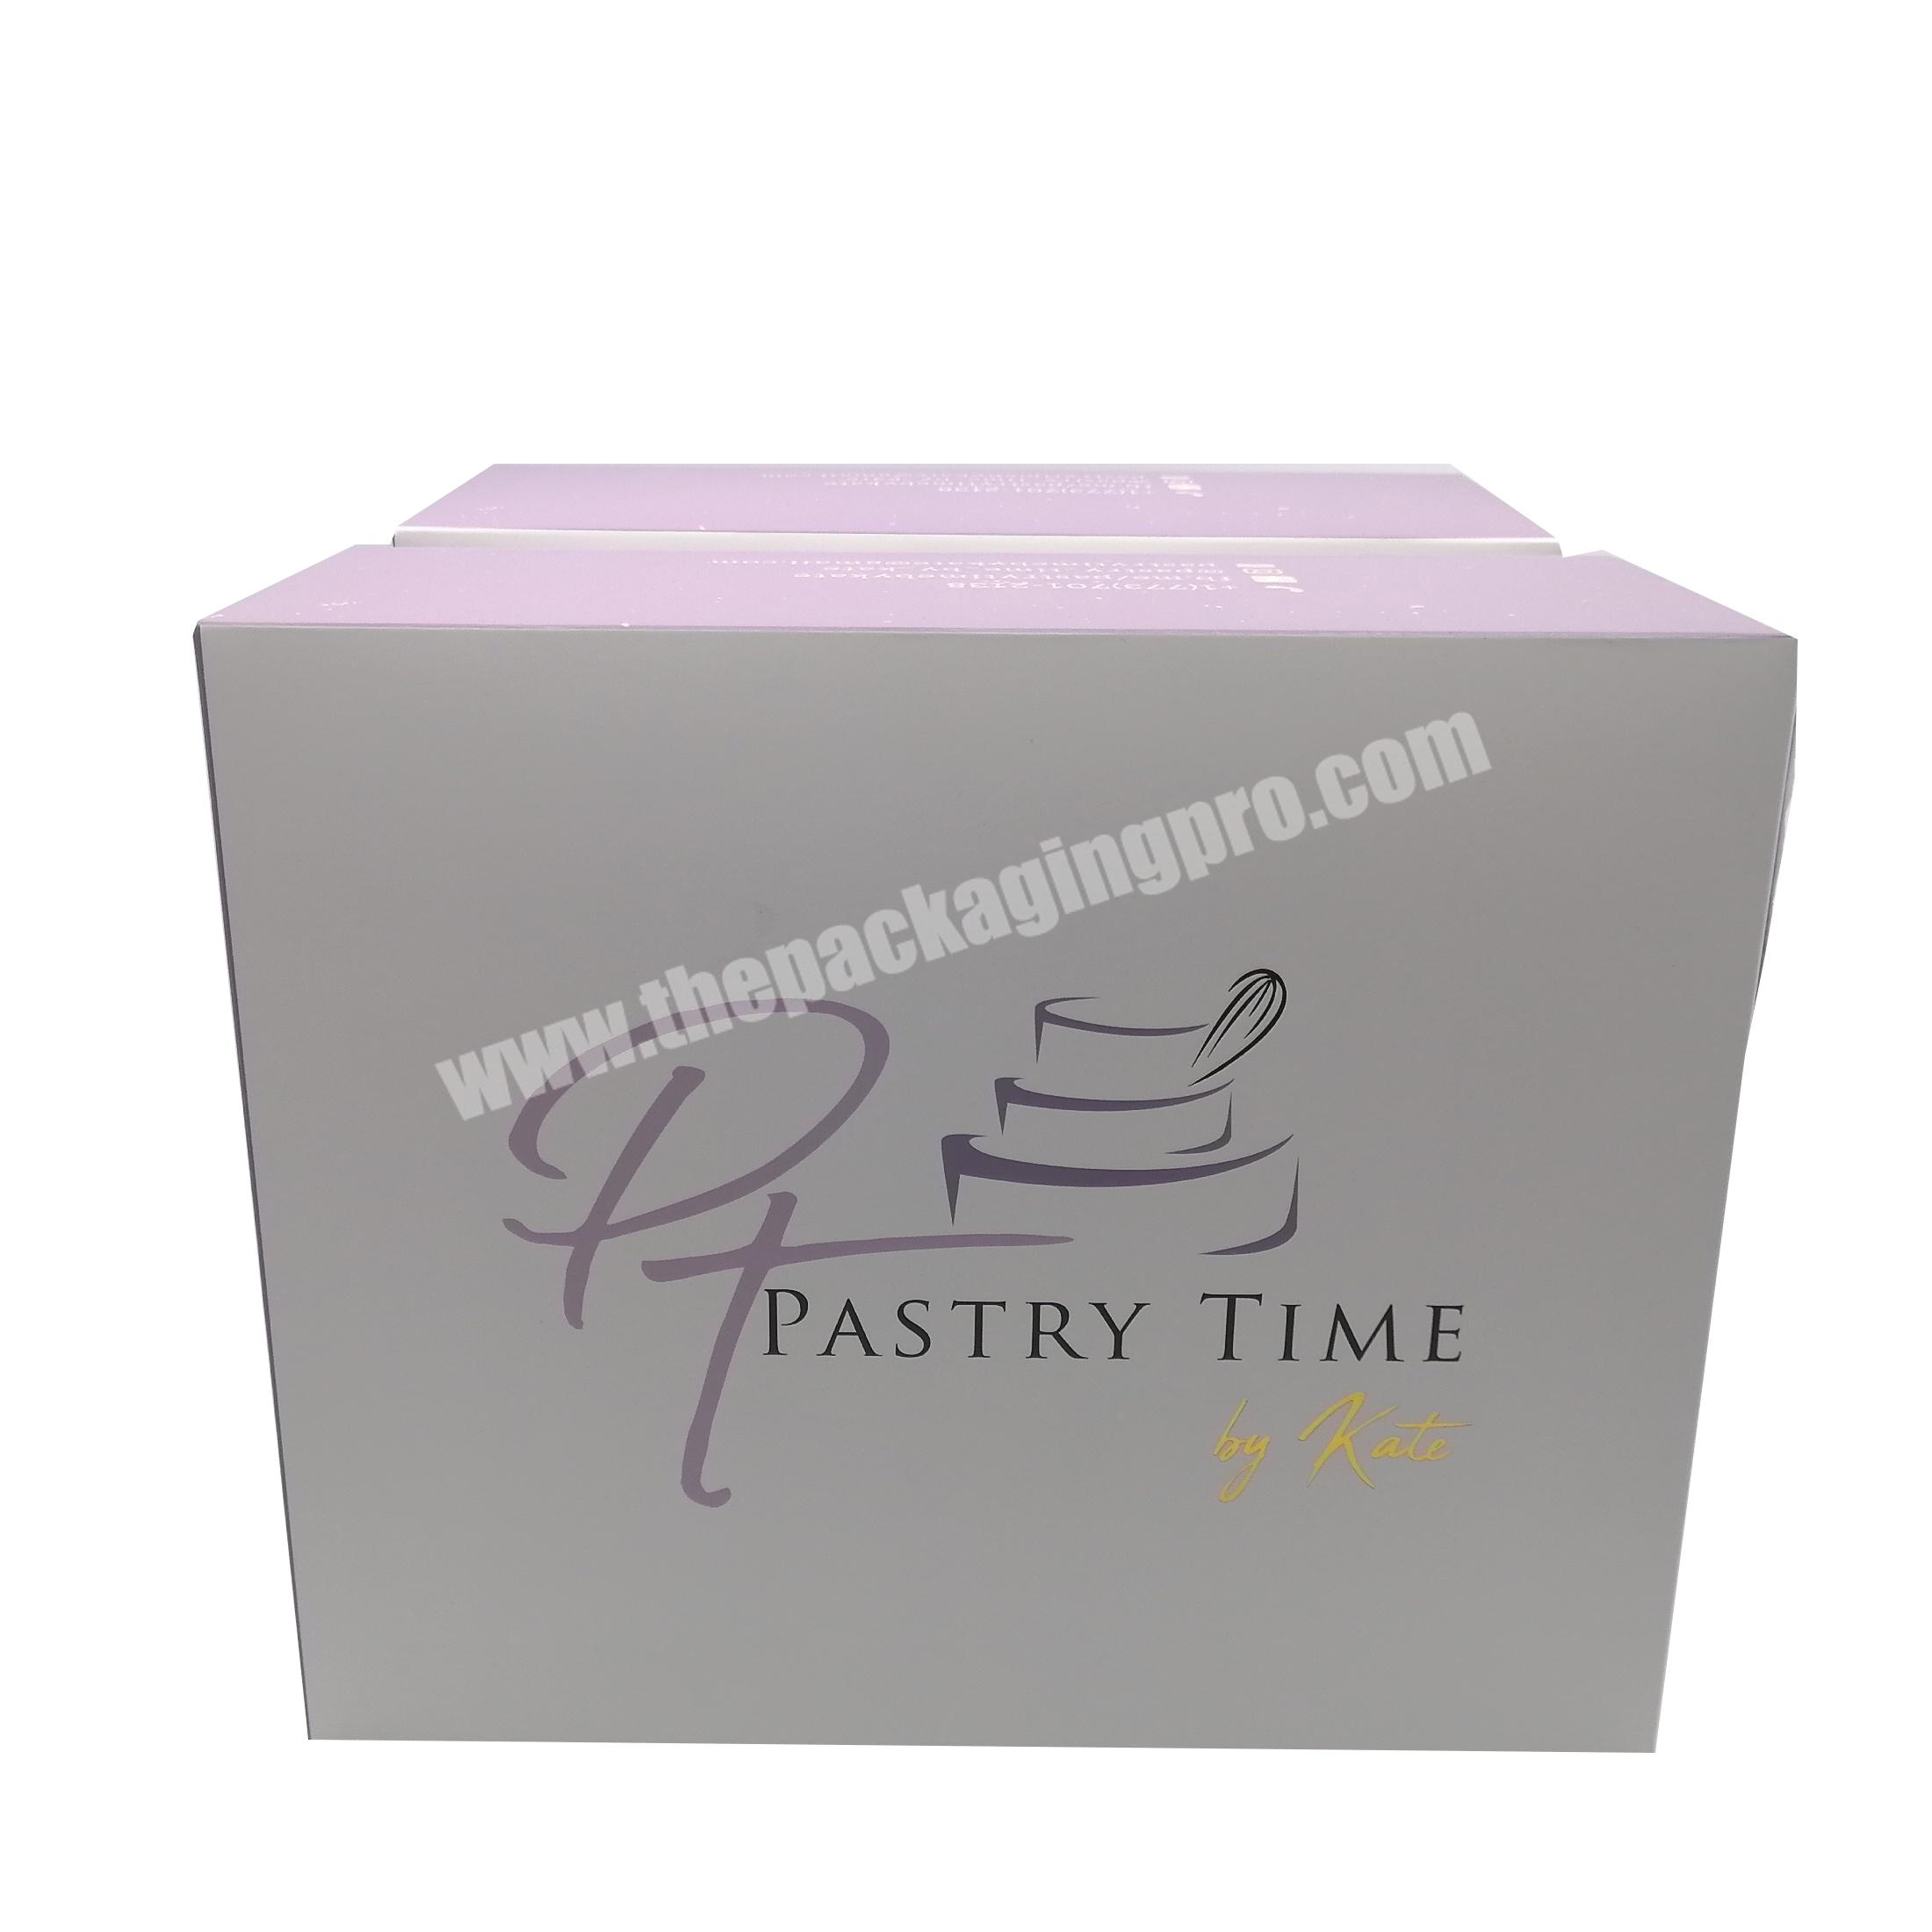 Top Sales Cute Cupcake Packaging Box Donut Dessert Pastry Paper Box For Bakery